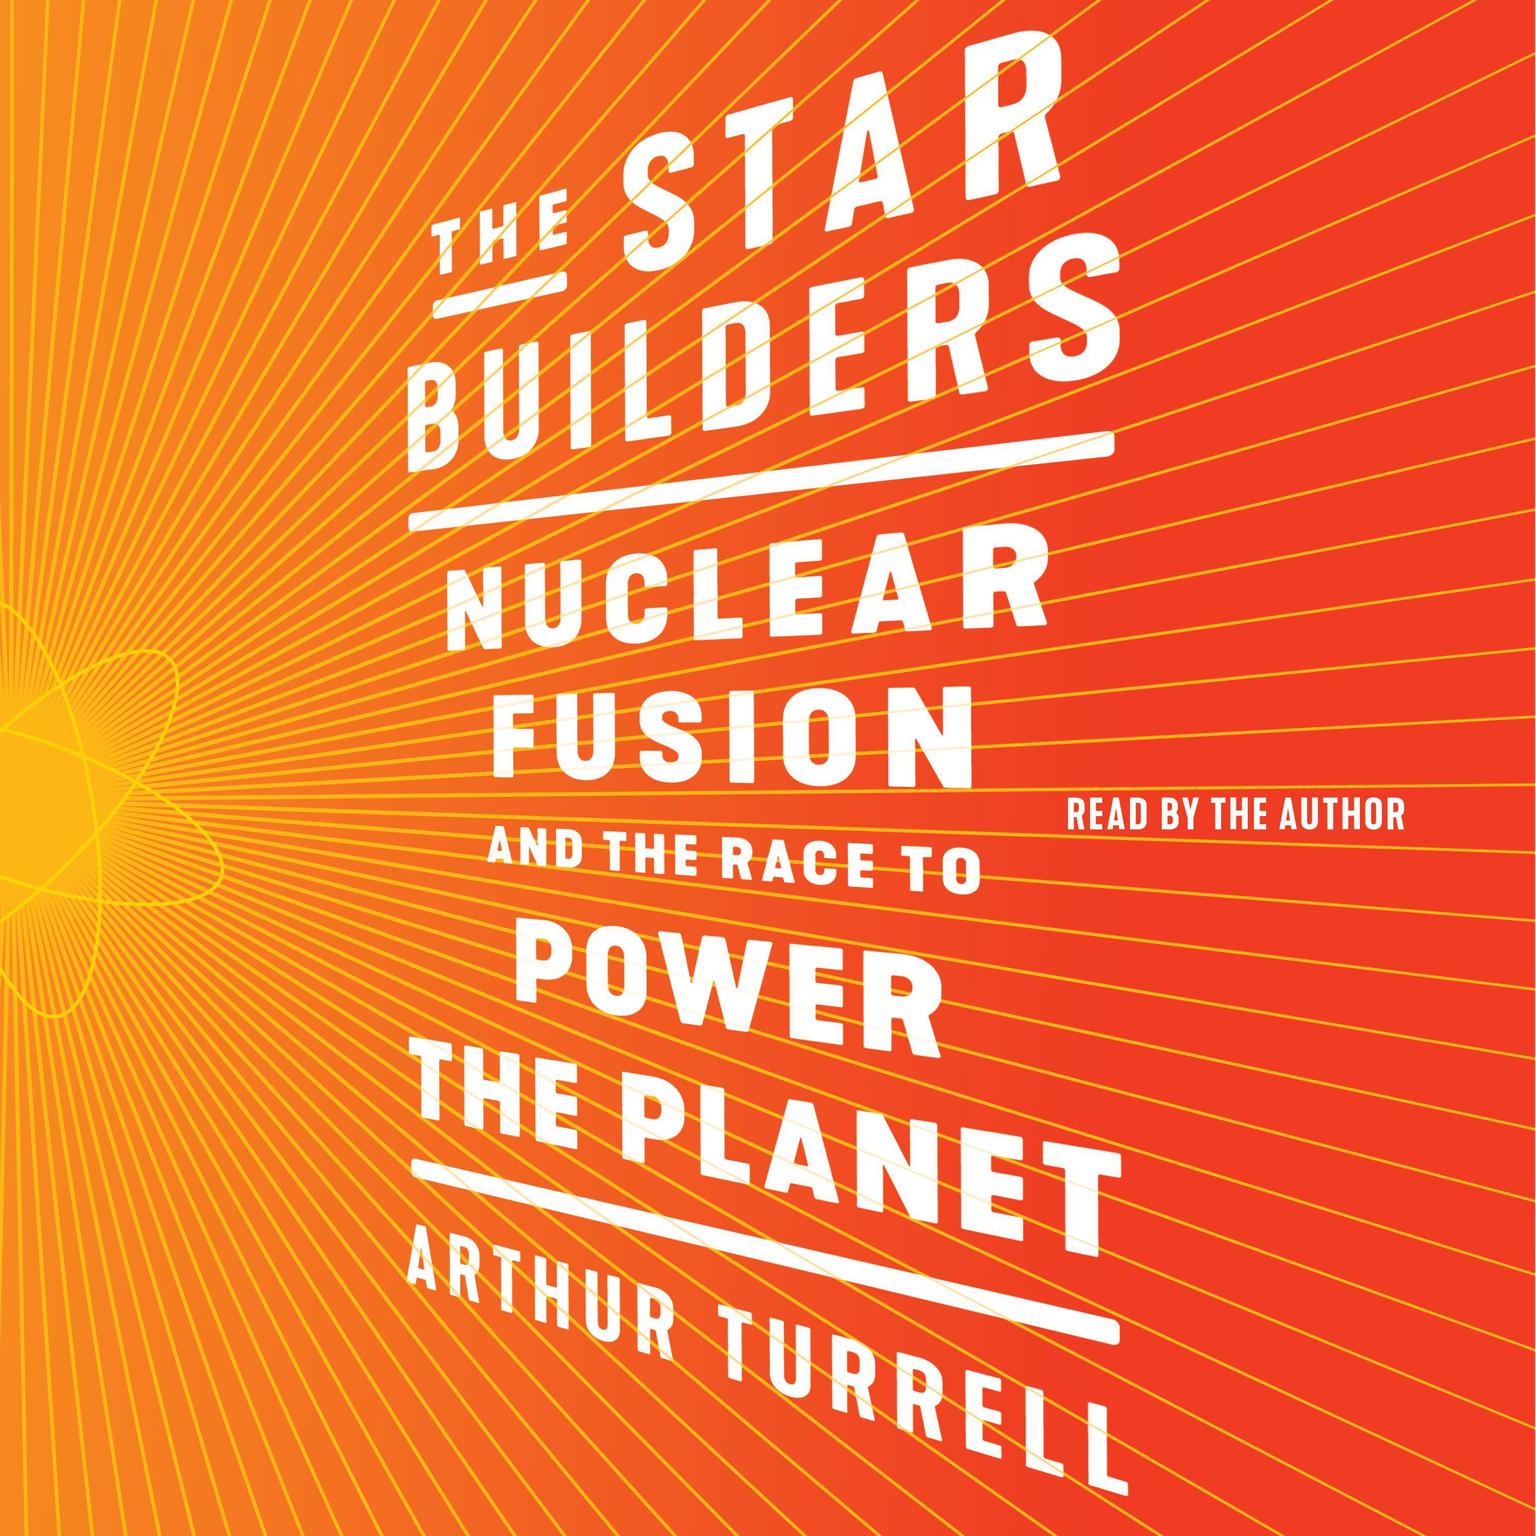 The Star Builders: Nuclear Fusion and the Race to Power the Planet Audiobook, by Arthur Turrell